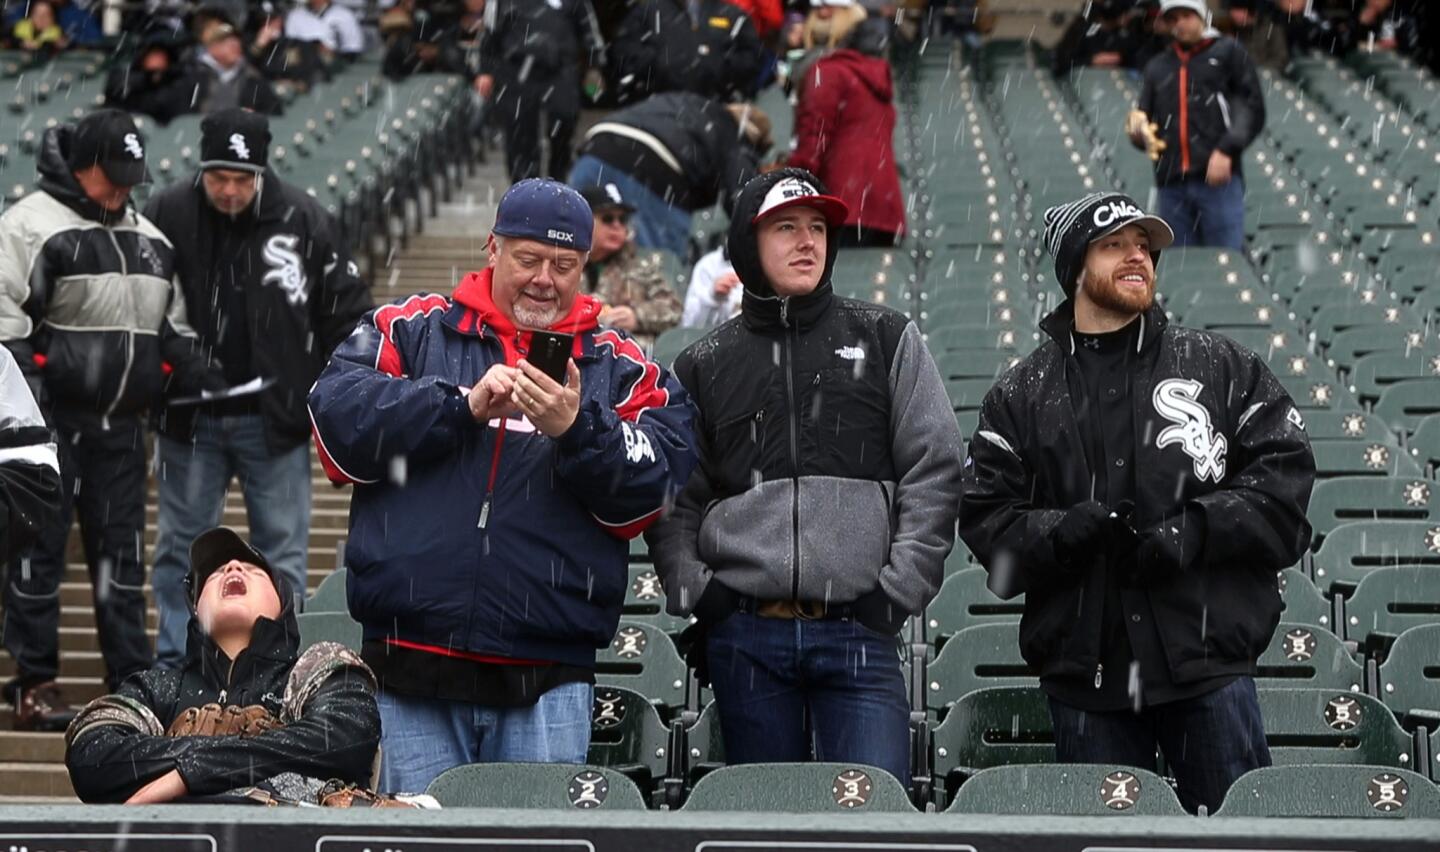 Home opener: Indians 7, White Sox 1